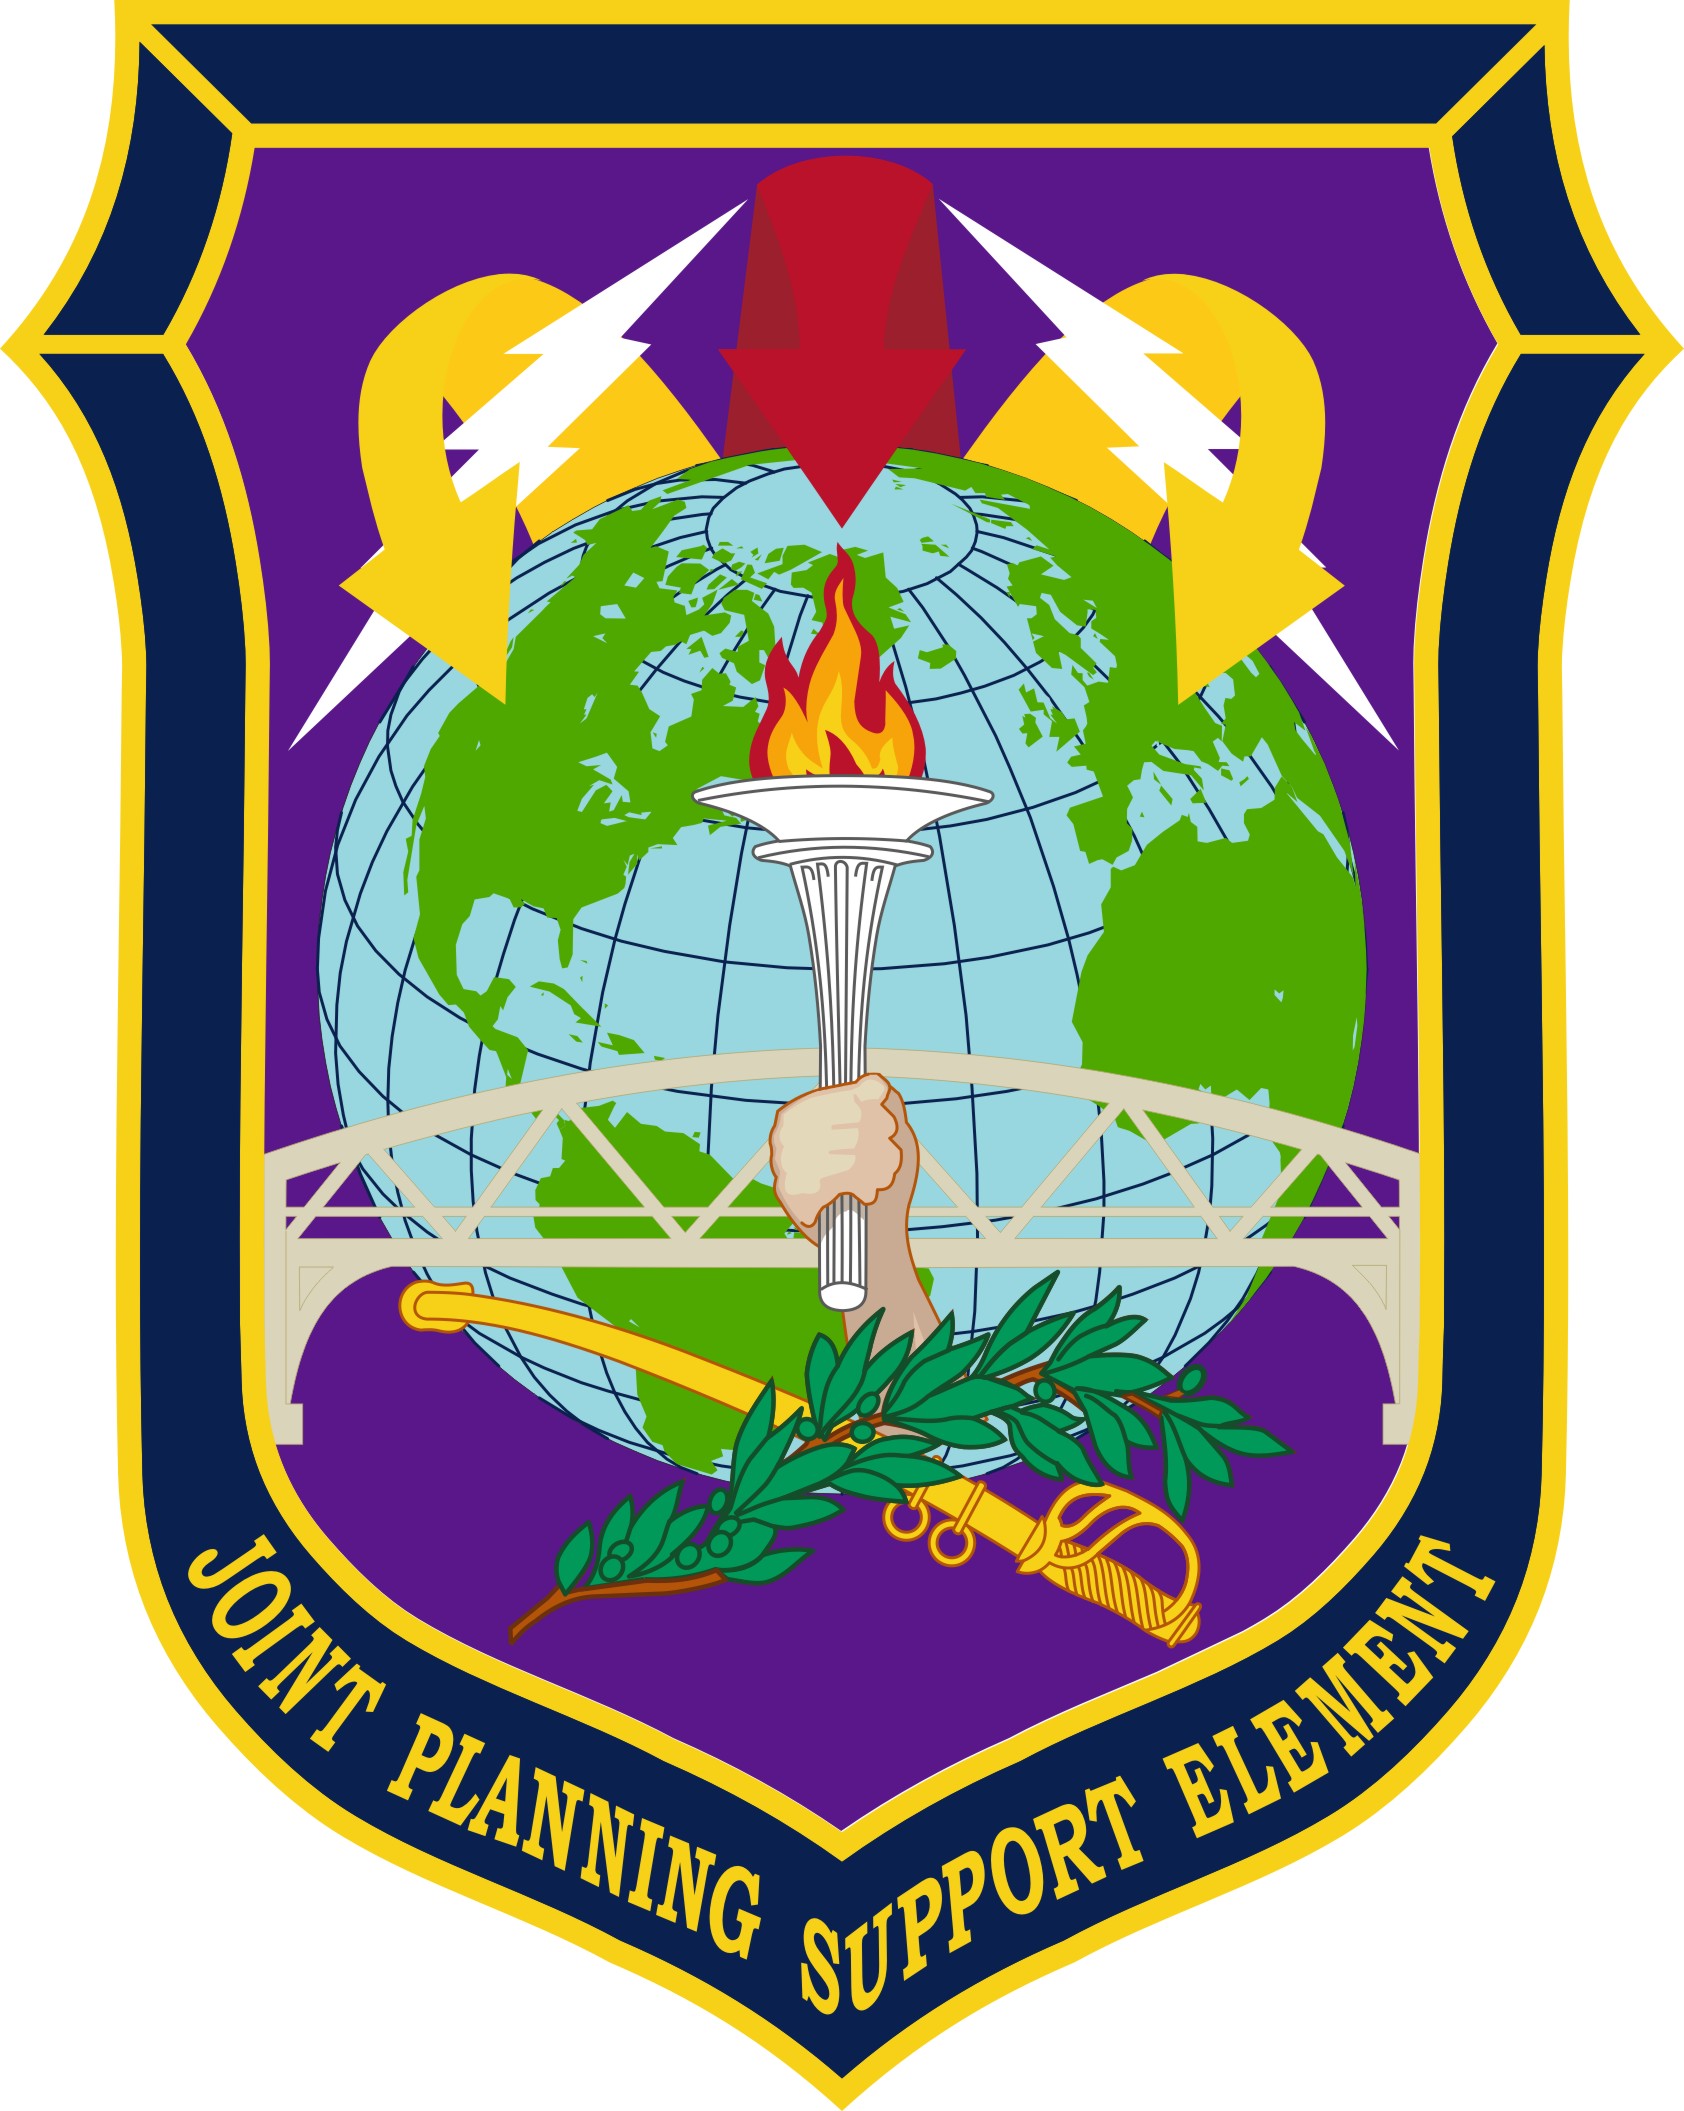 Joint Planning Support Element Seal